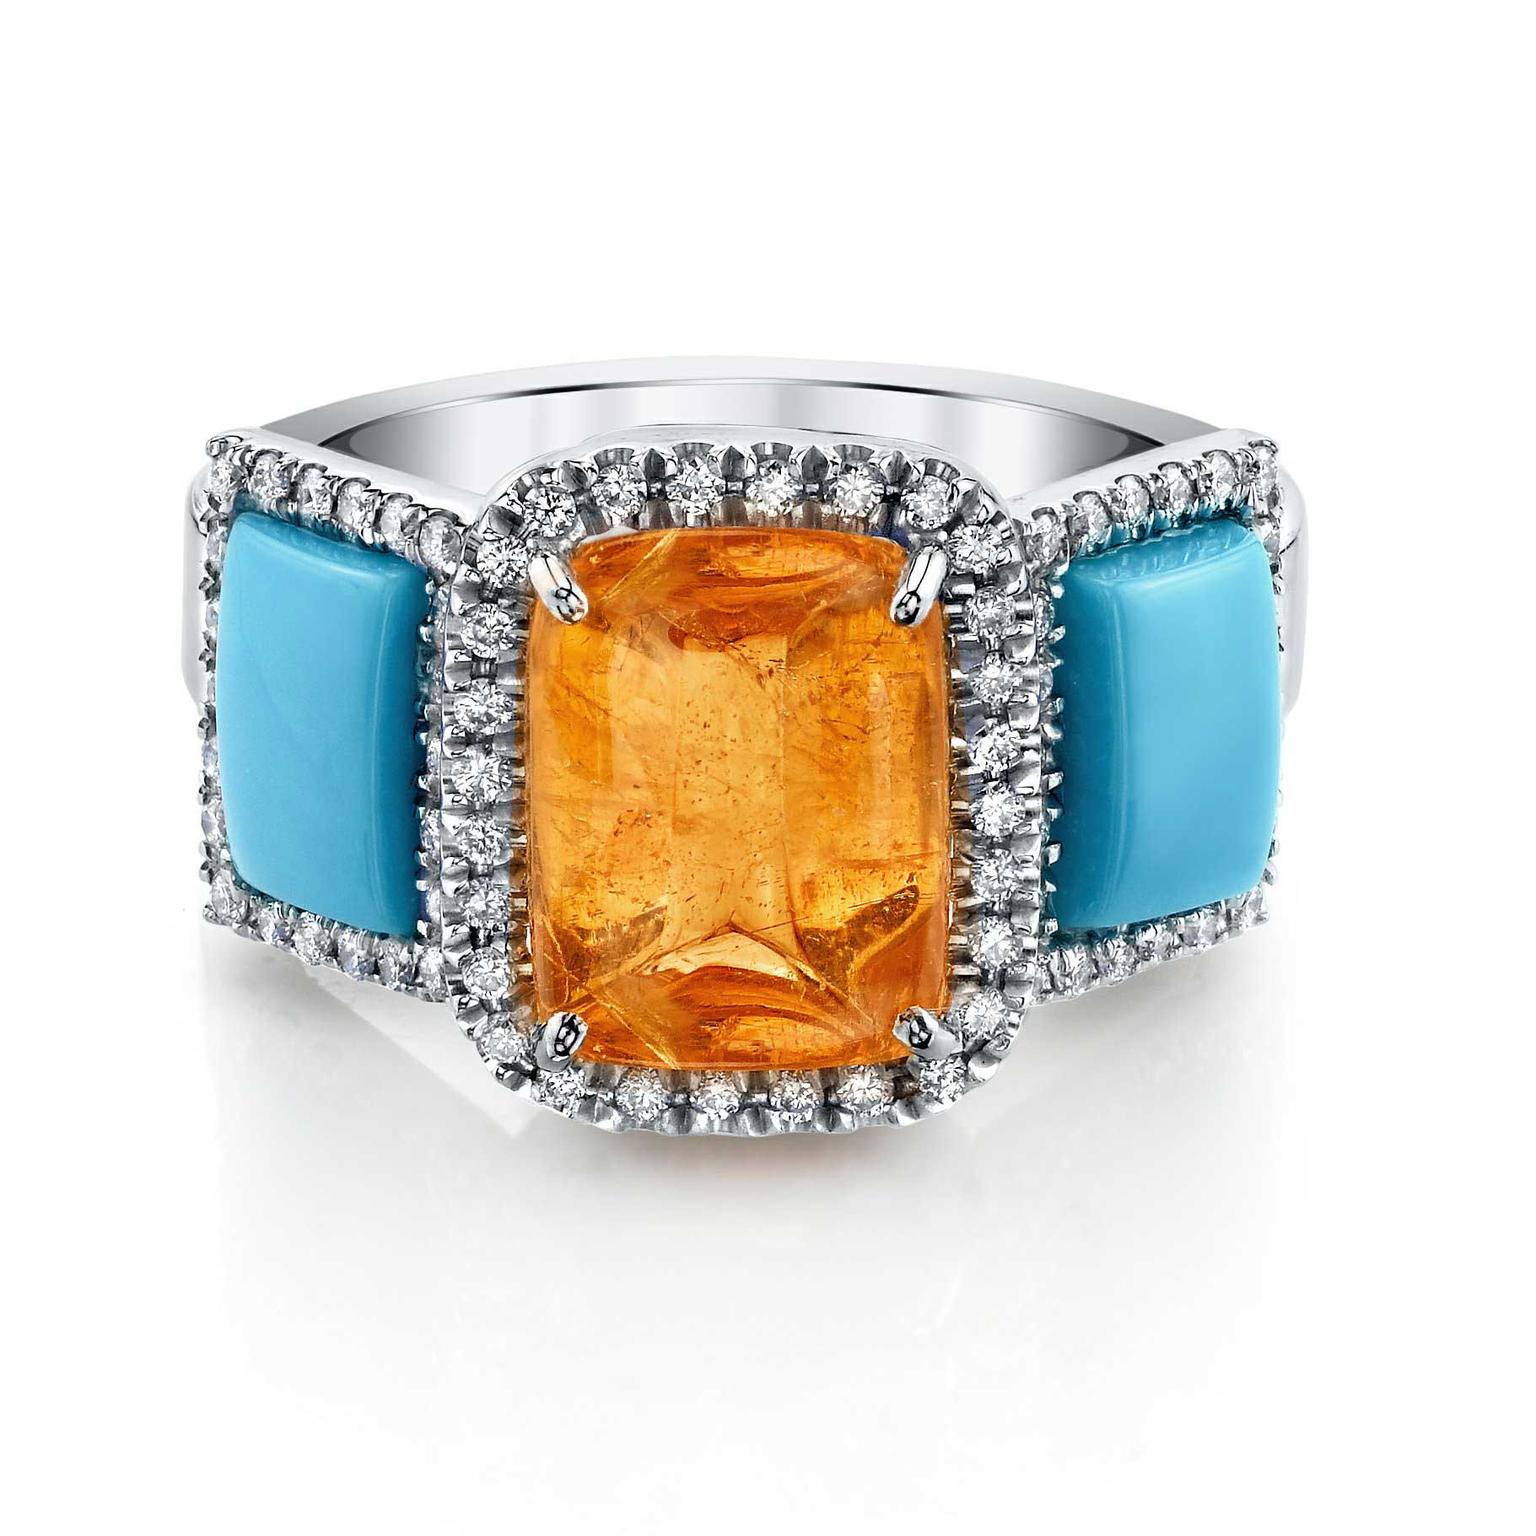 New season turquoise jewellery showcases the many hues of this ancient gemstone